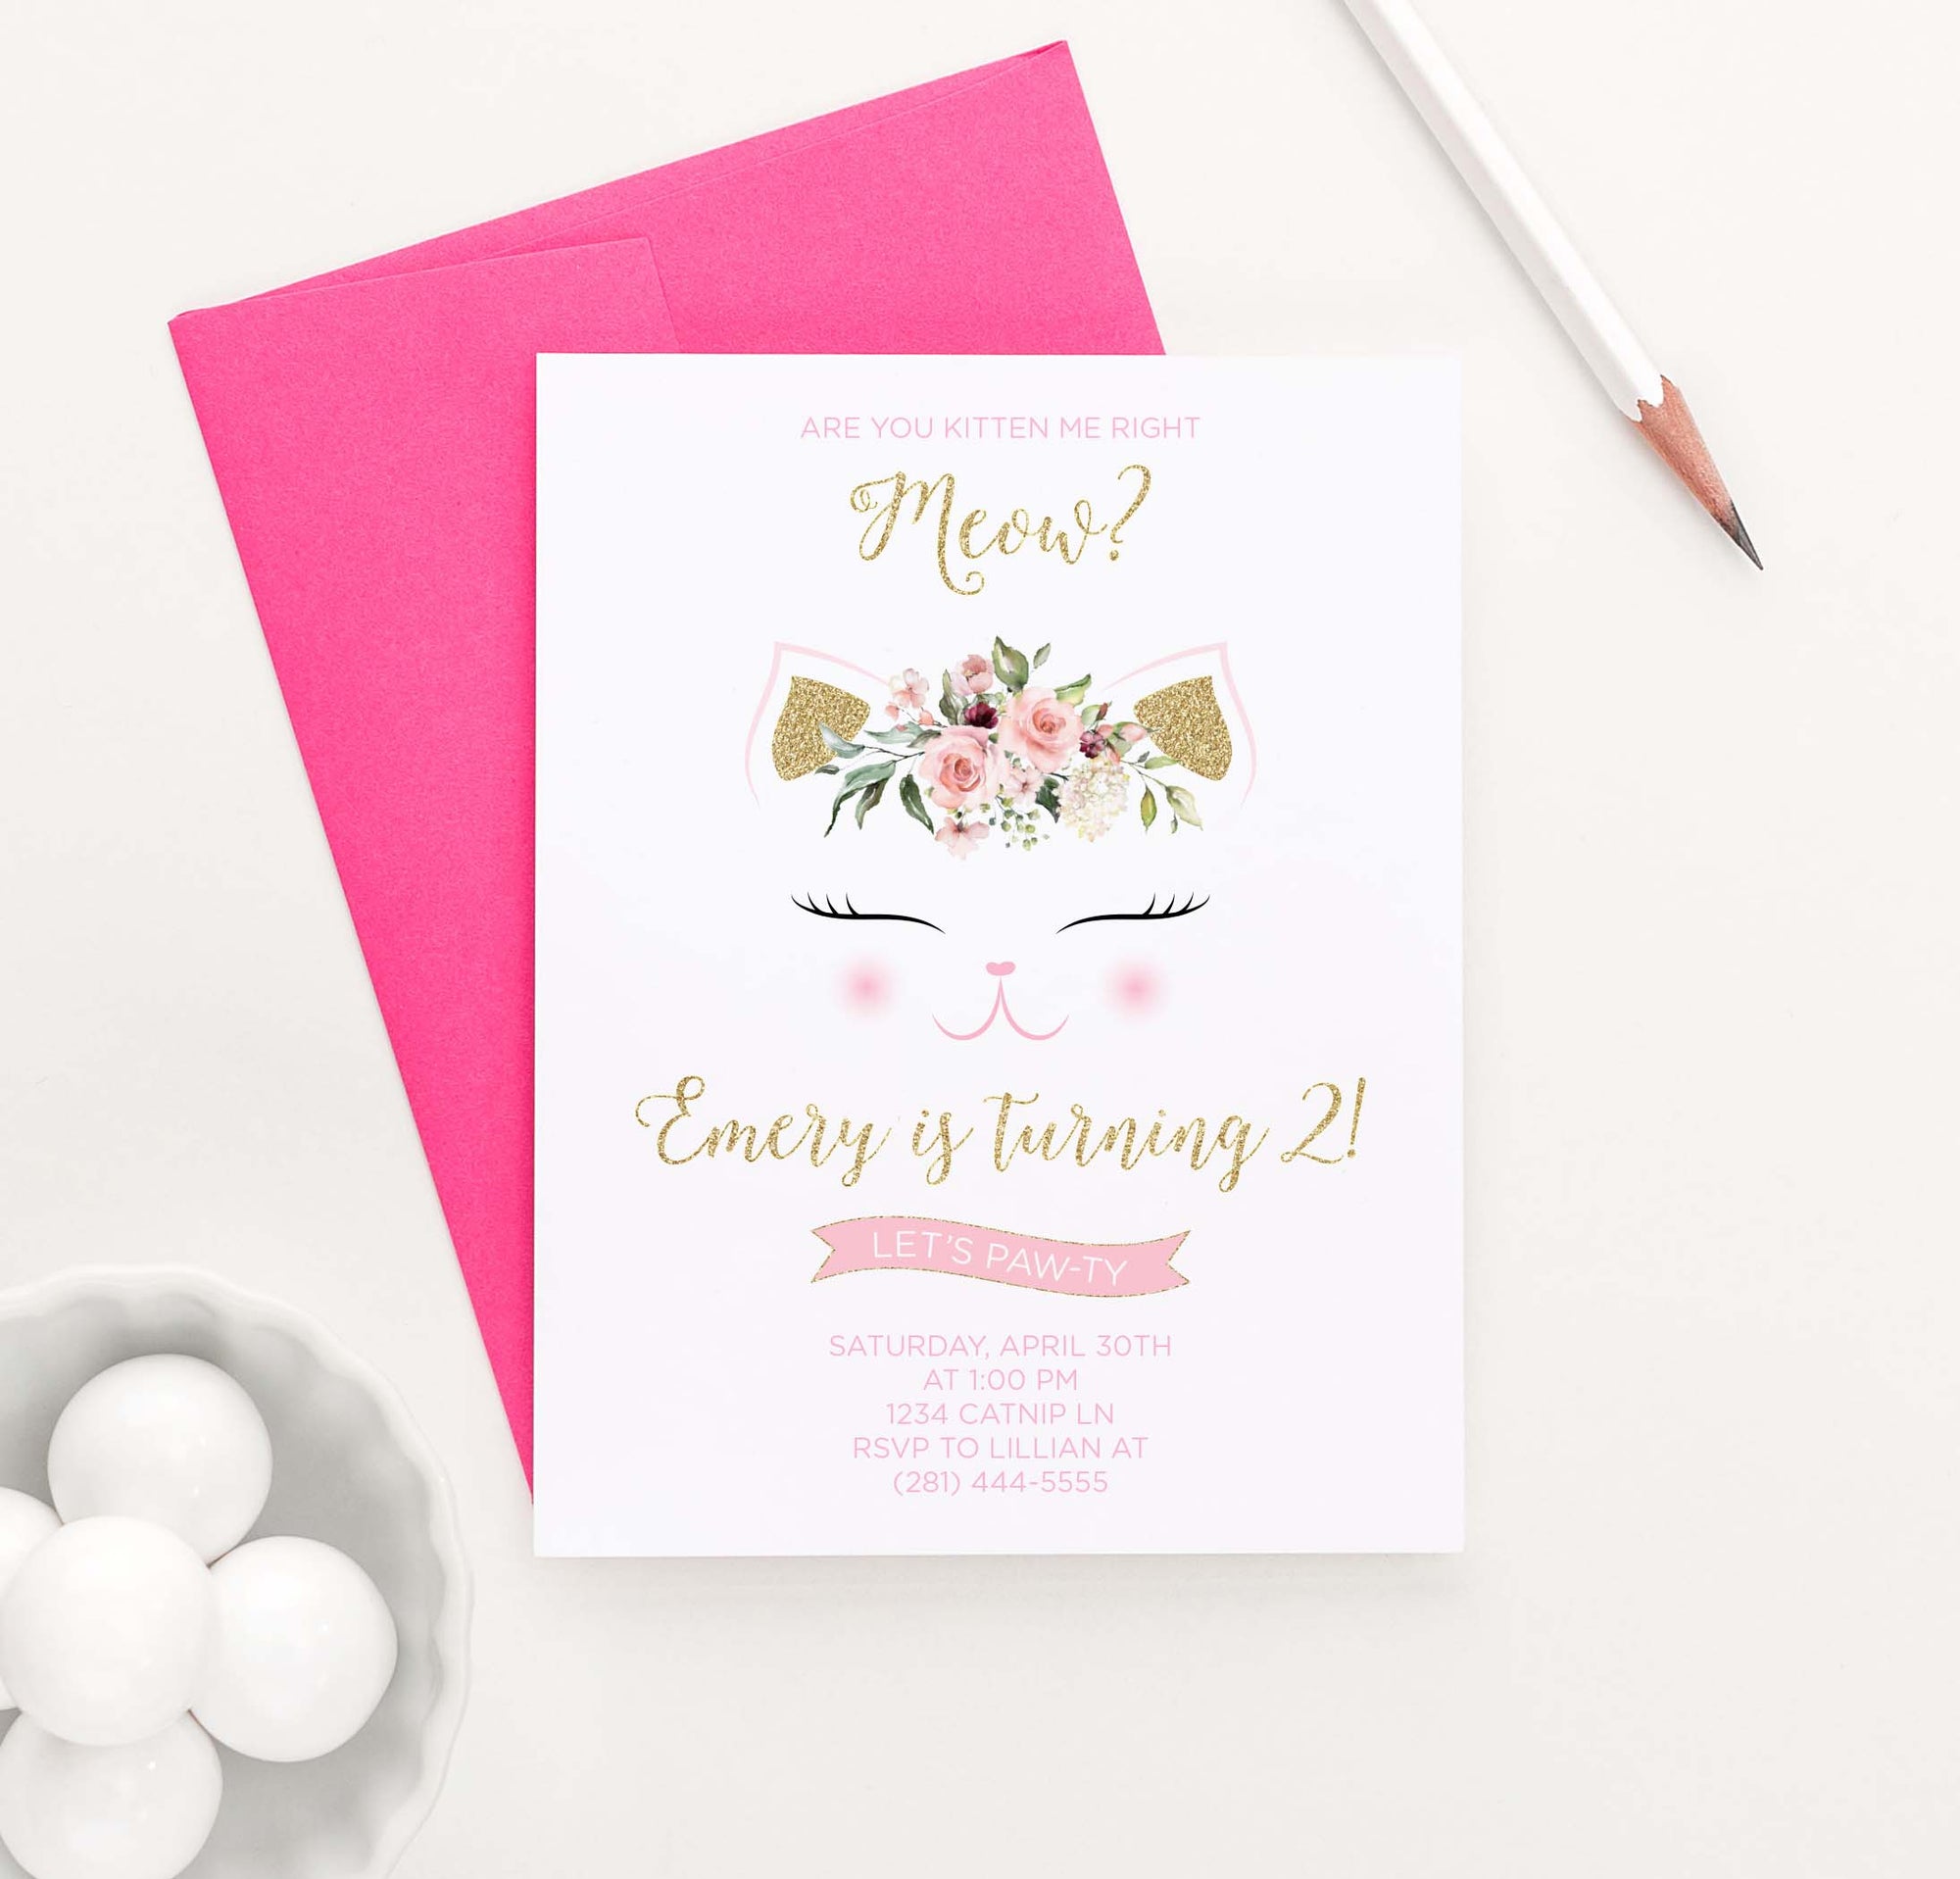 Cute Cat Birthday Party Invites with Florals